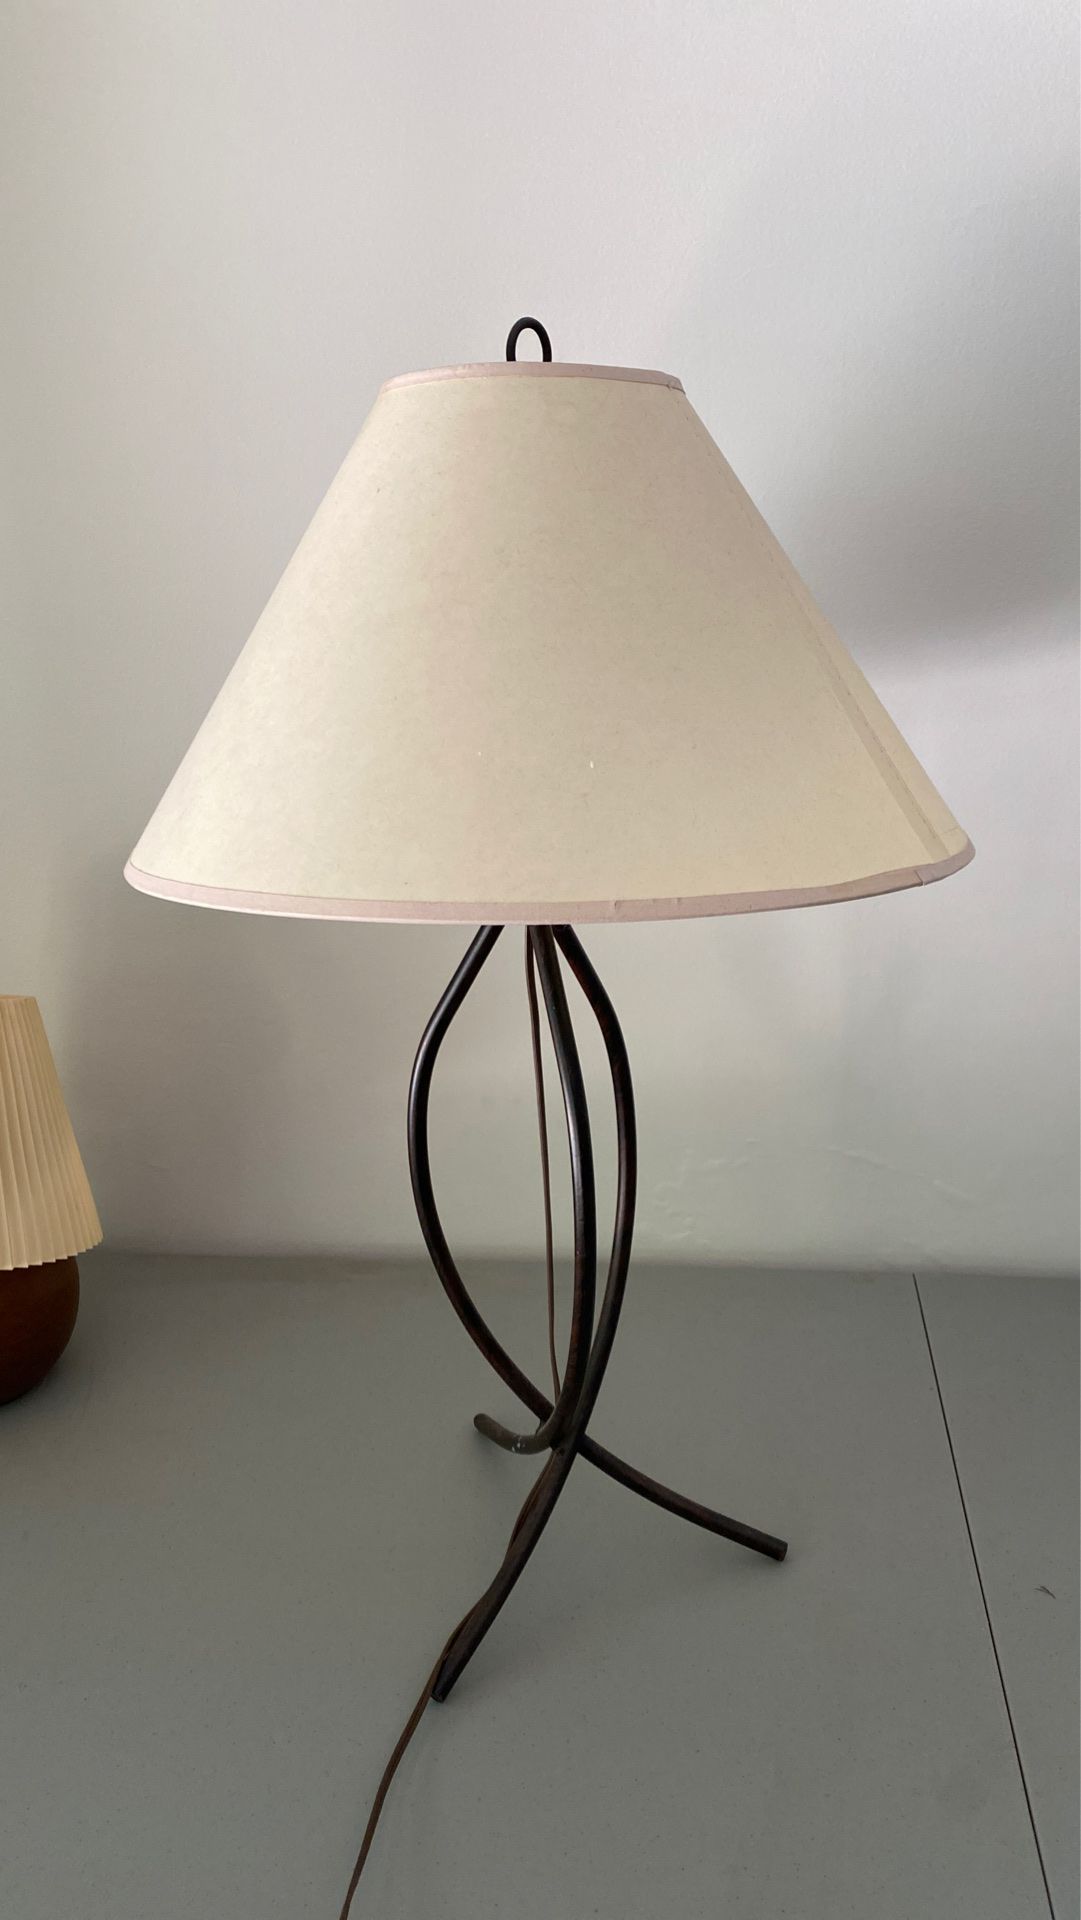 Pottery Barn Wrought Iron Lamp with Shade